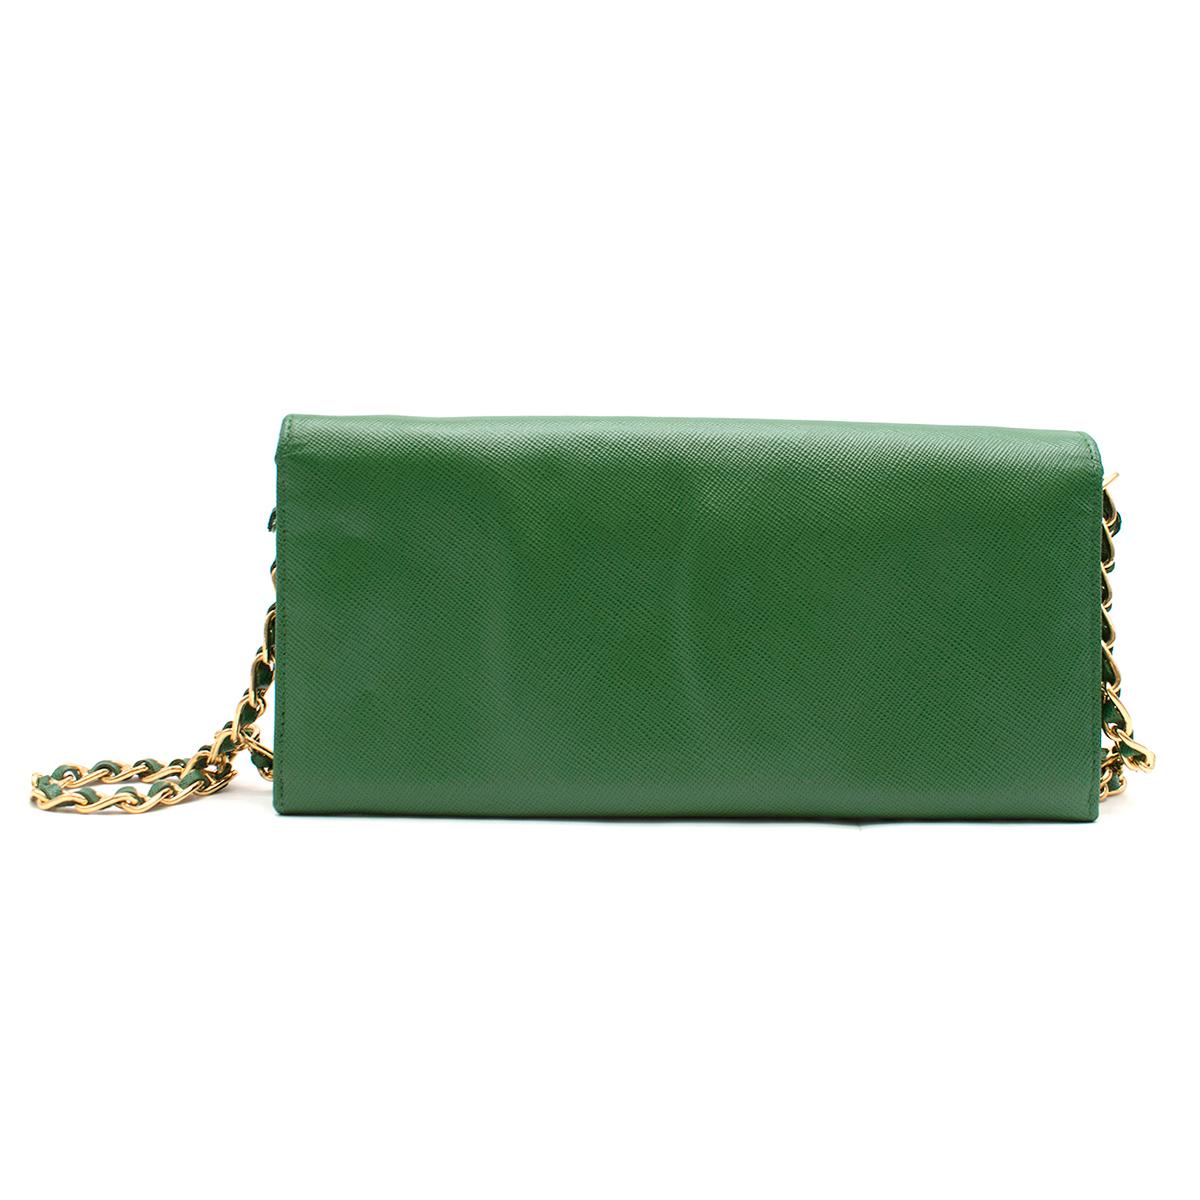 Prada Green Saffiano Leather Wallet on Chain

-Green, leather 
-Gold chain hardware 
-Removable chain
-Flap opening 
-Push button closure
-Two main compartments with center zip compartment 
-Multiple open pockets for storage

Please note, these